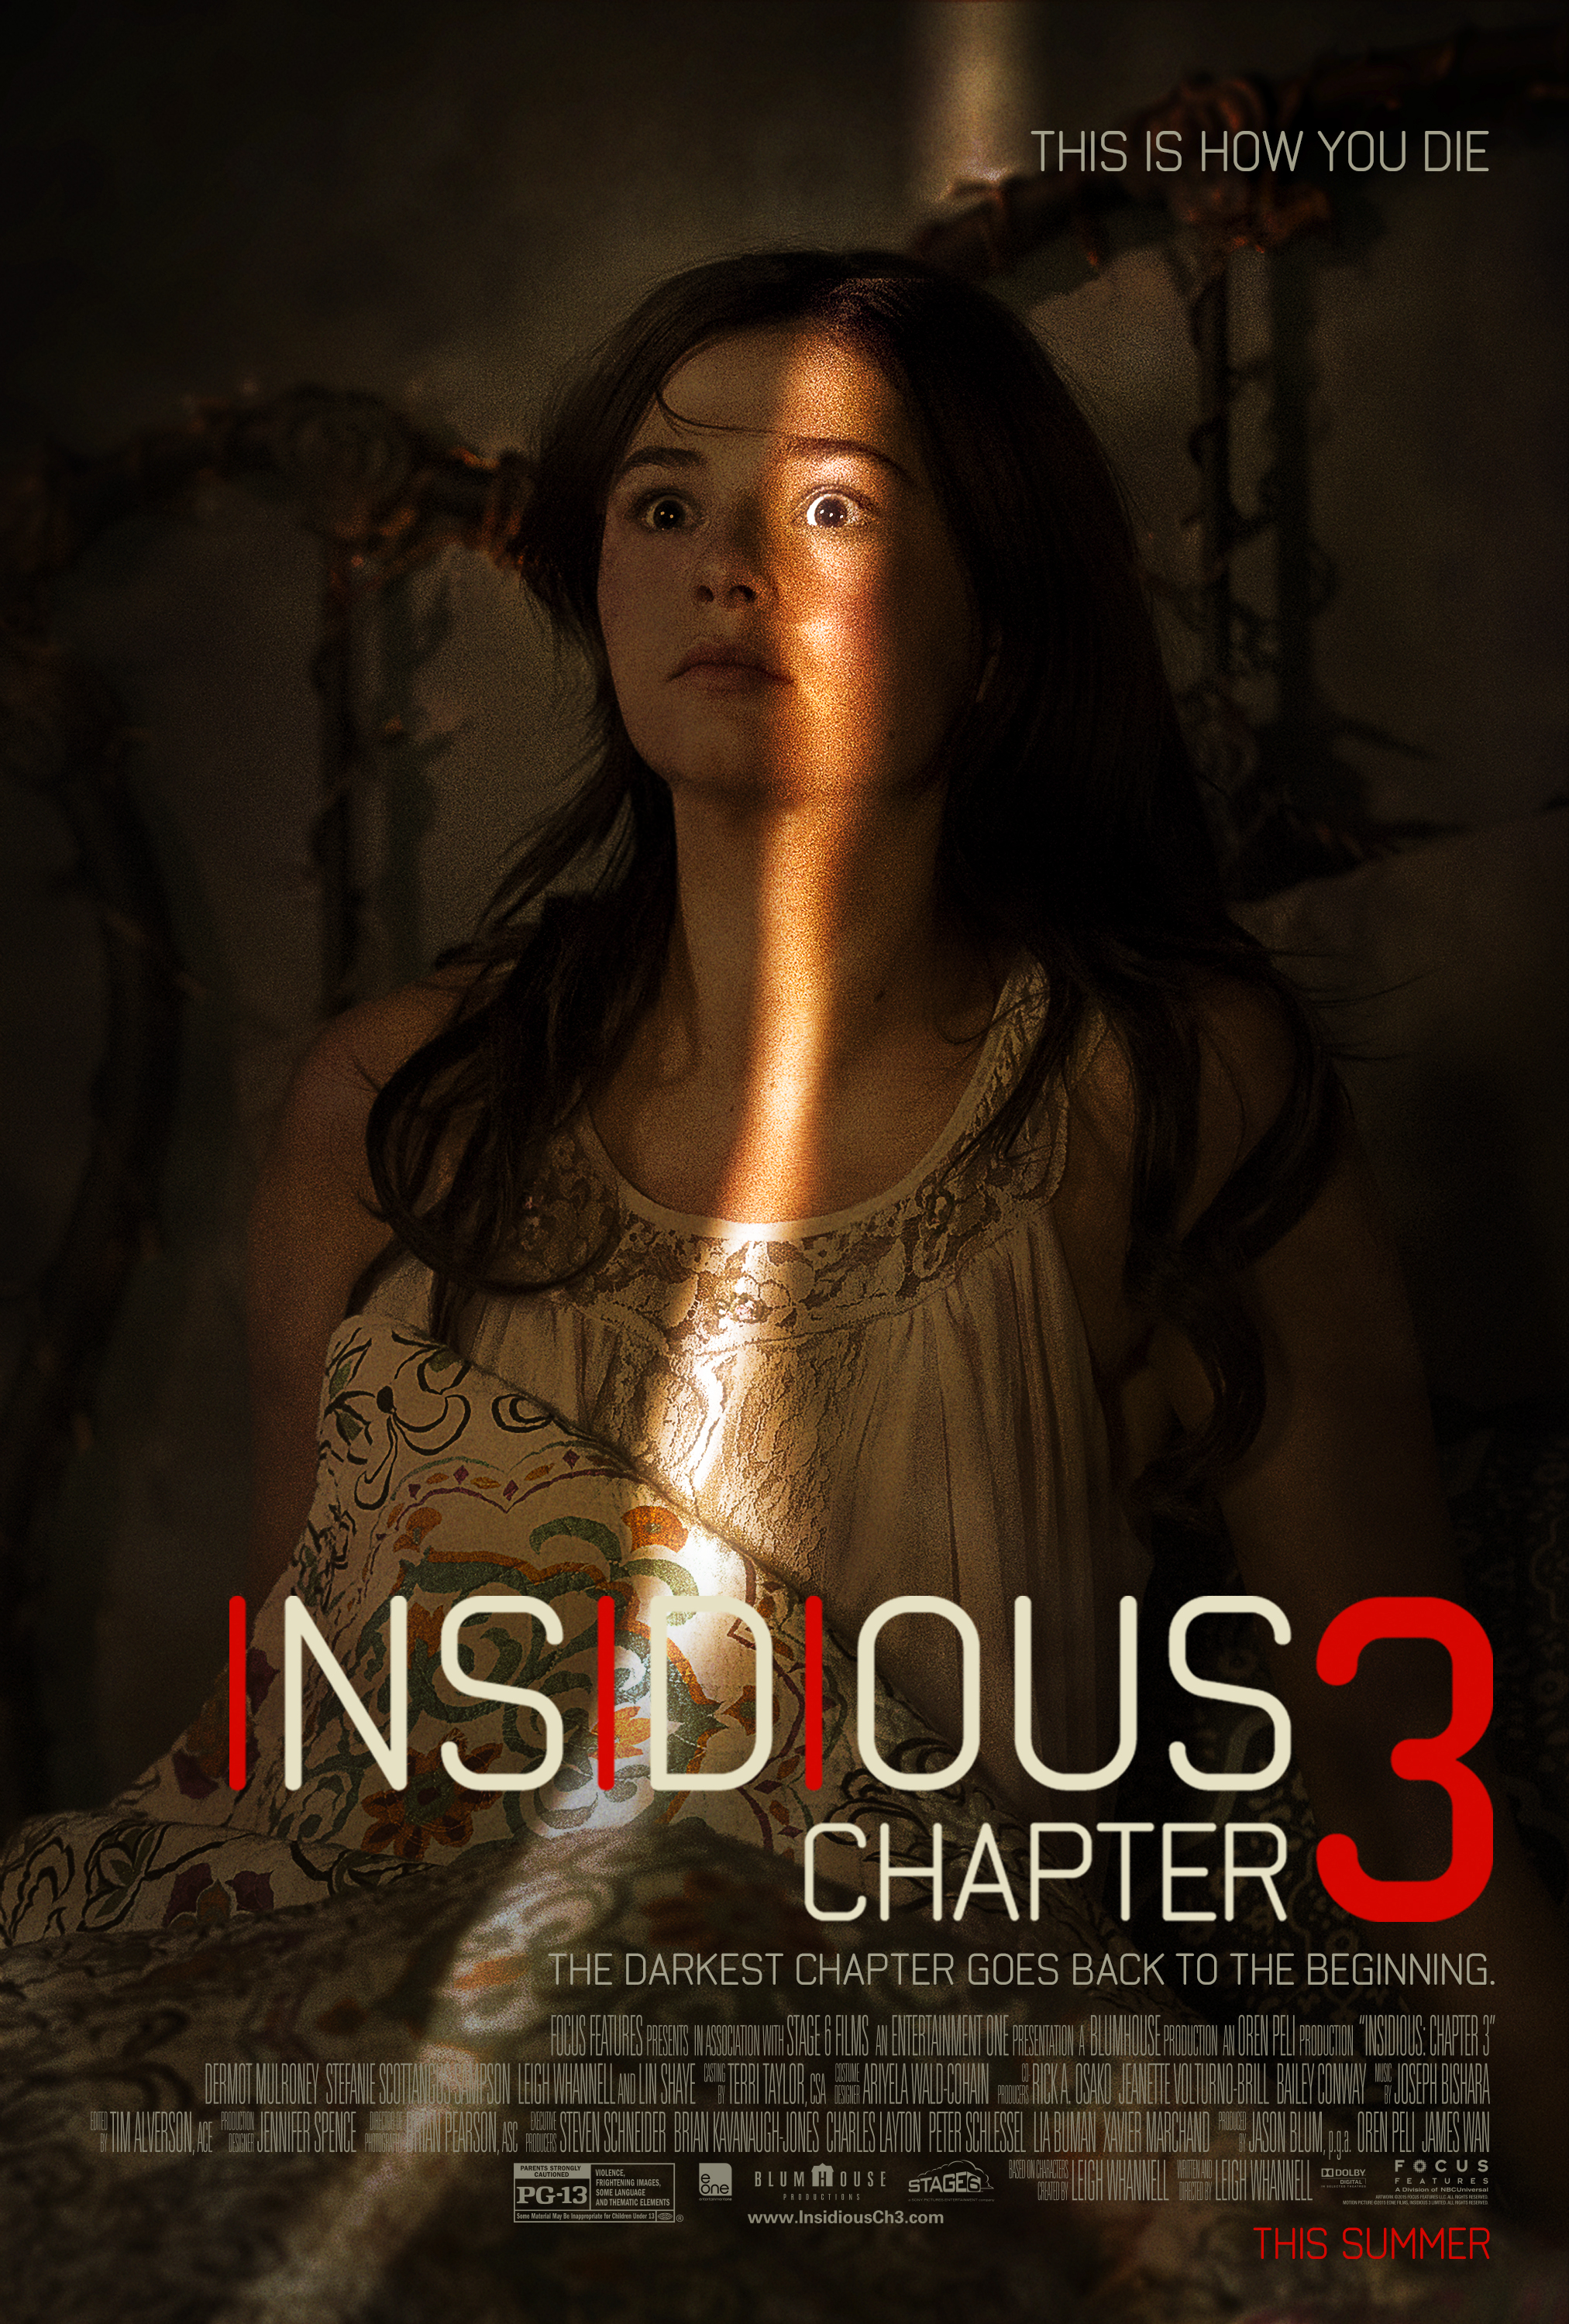 Insidious Chapter 3 film review: back to where it began